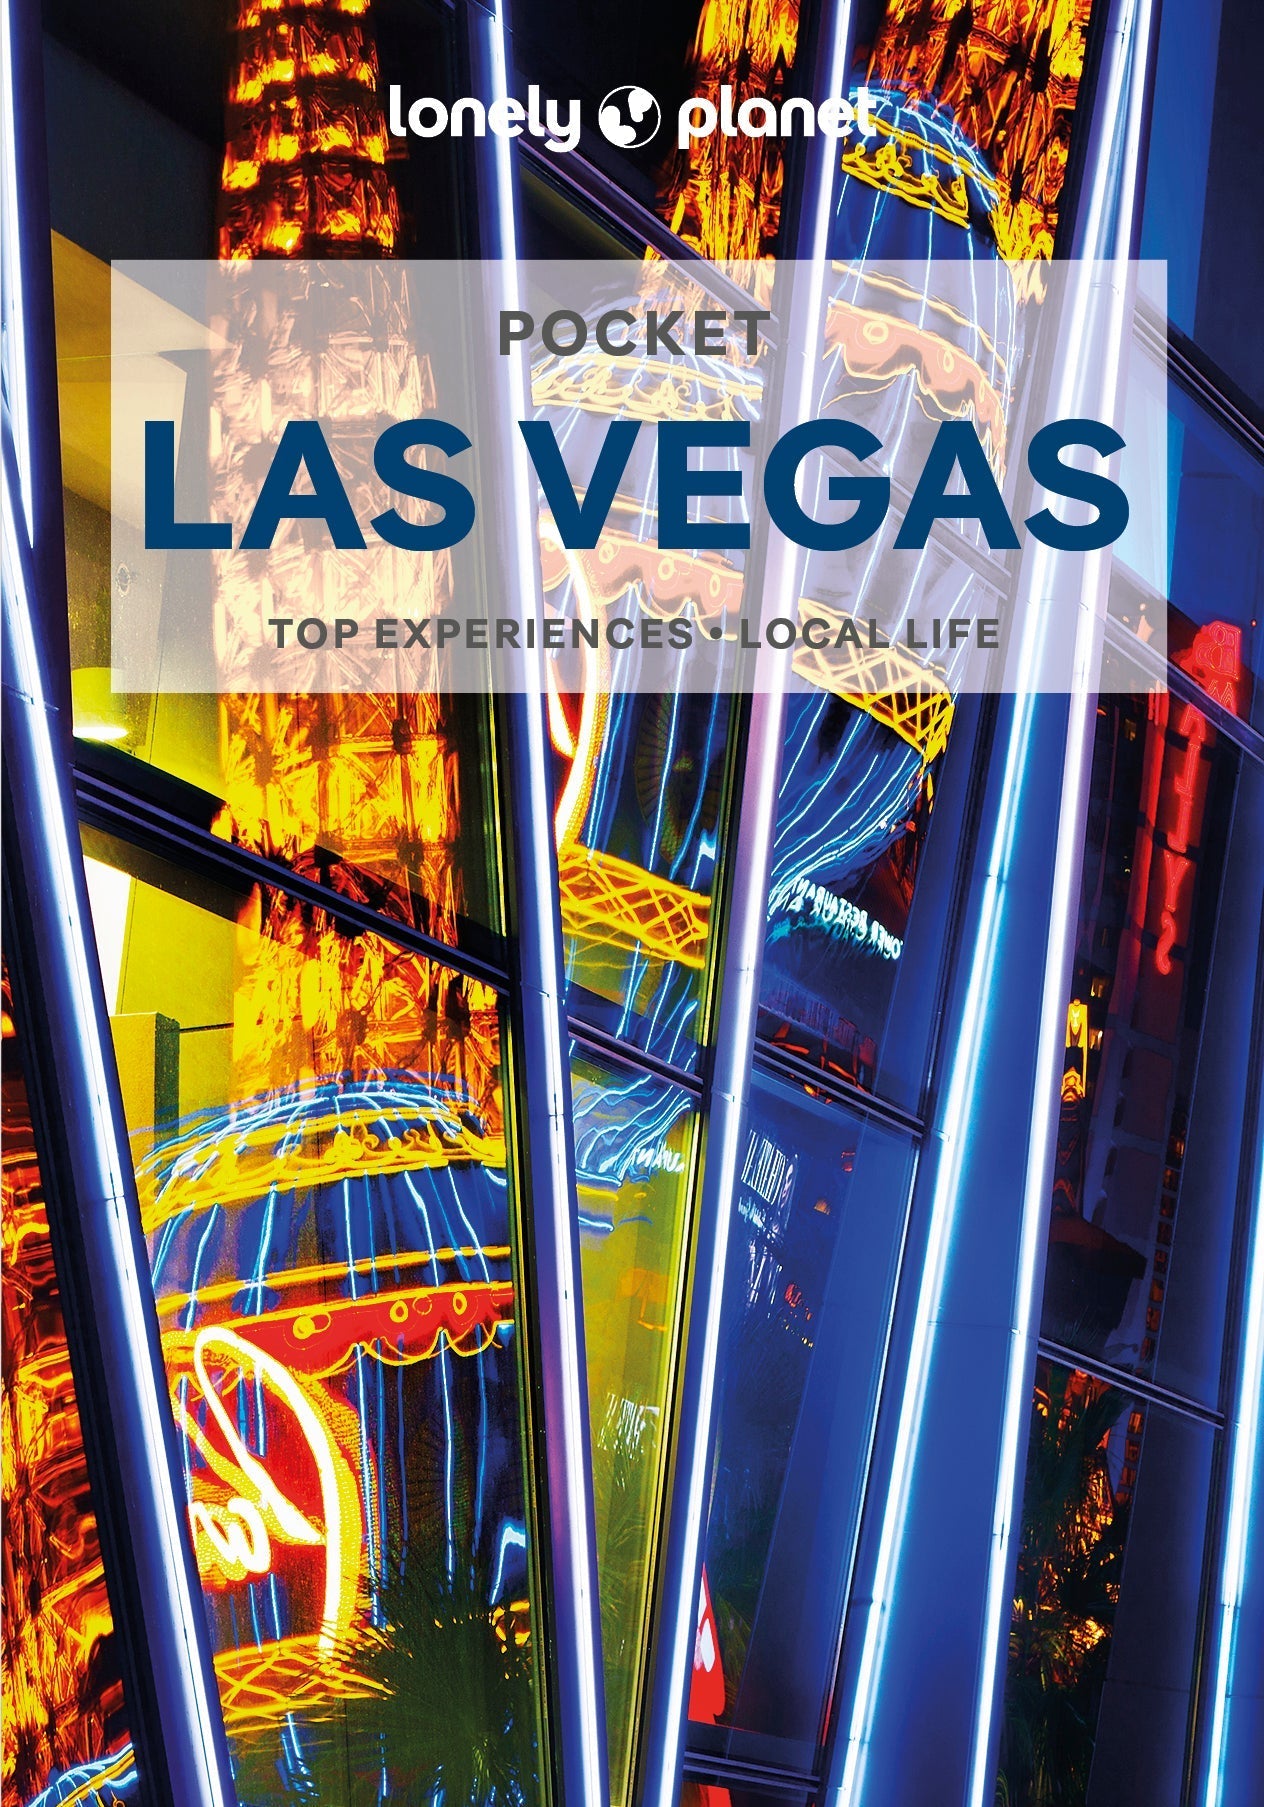 Las Vegas Travel Guide 2022: Sin City's Most Popular Attractions